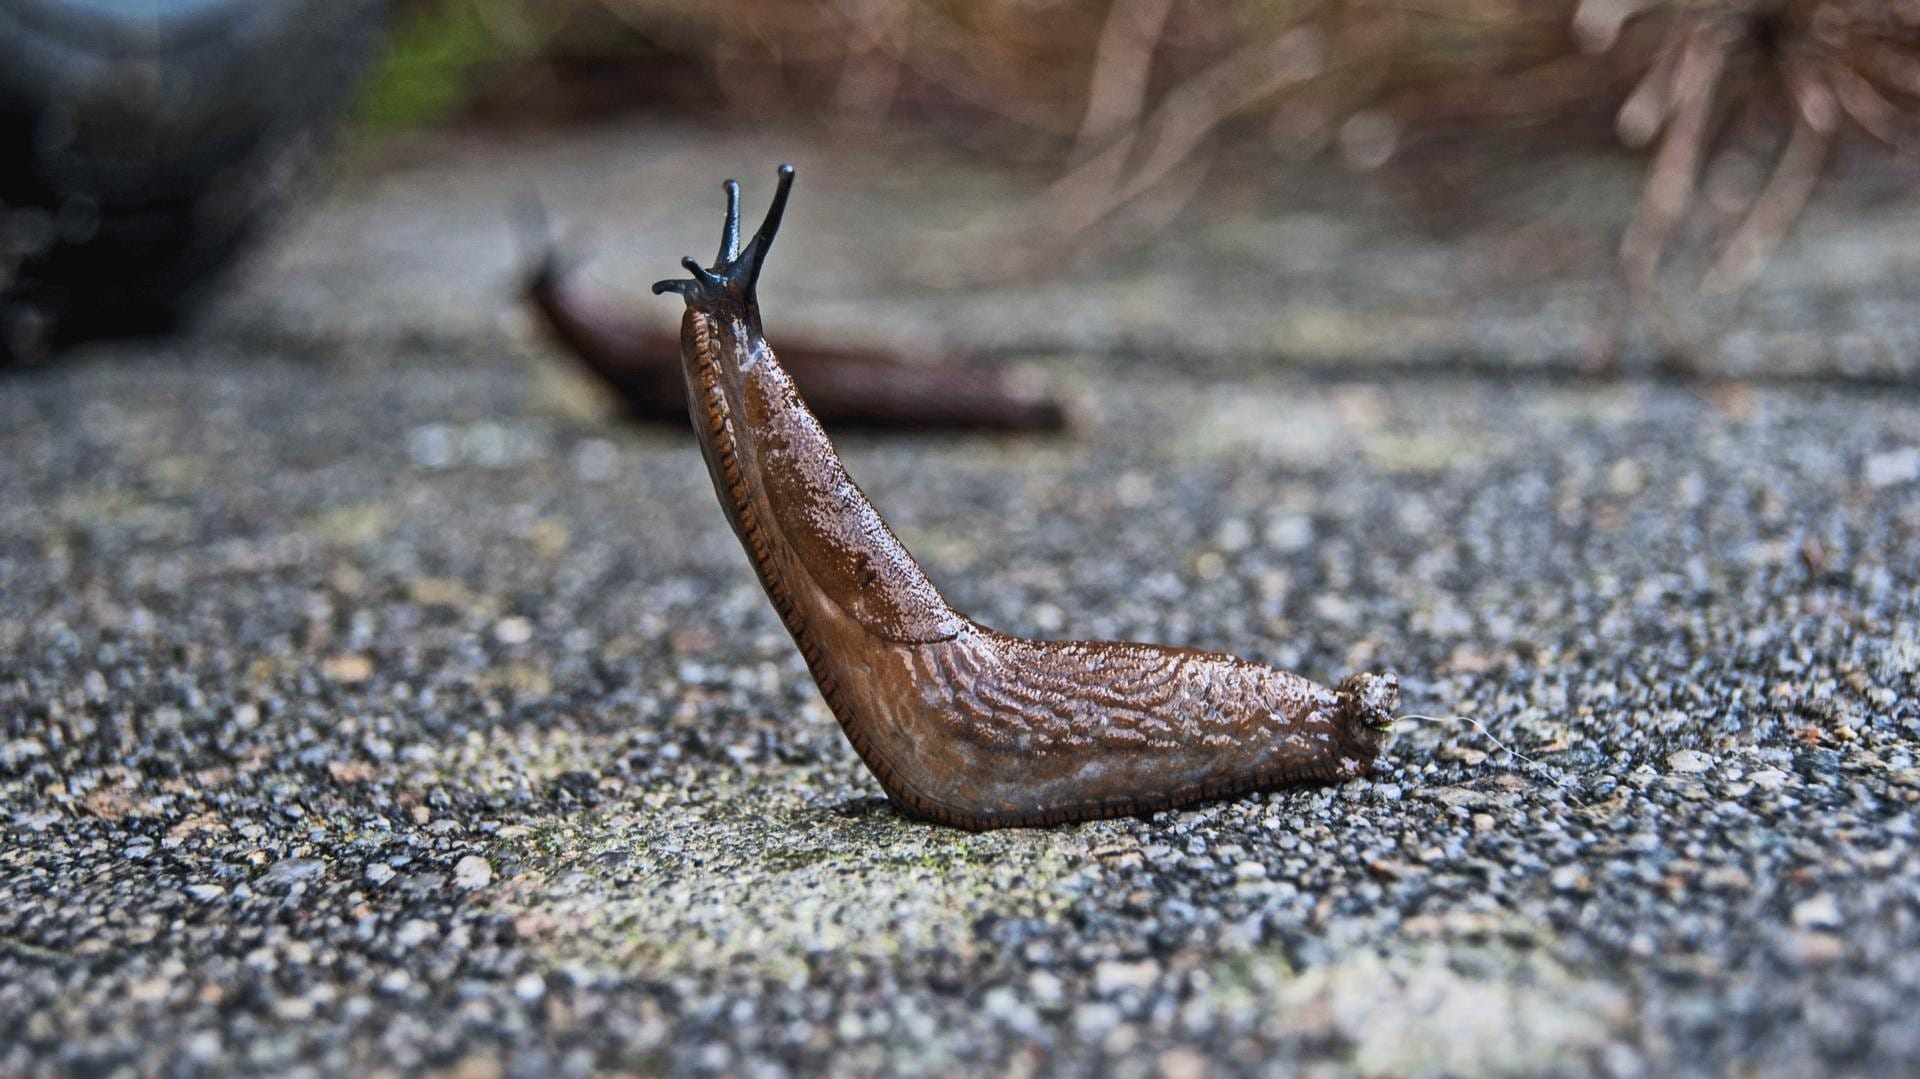 Slugs thrive in damp and mild conditions.